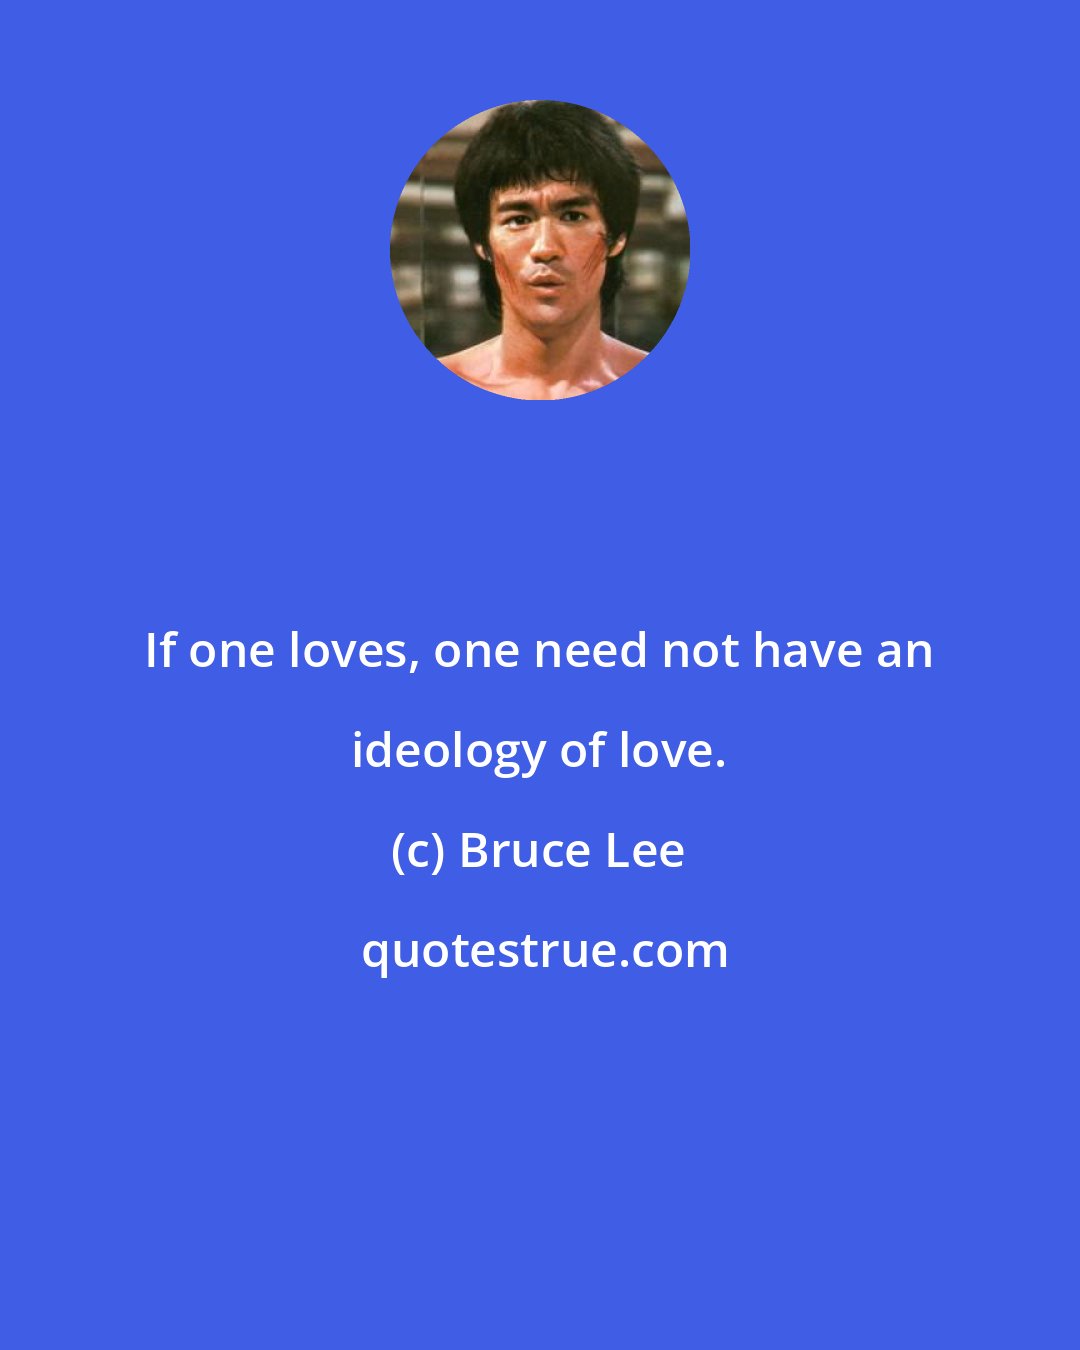 Bruce Lee: If one loves, one need not have an ideology of love.